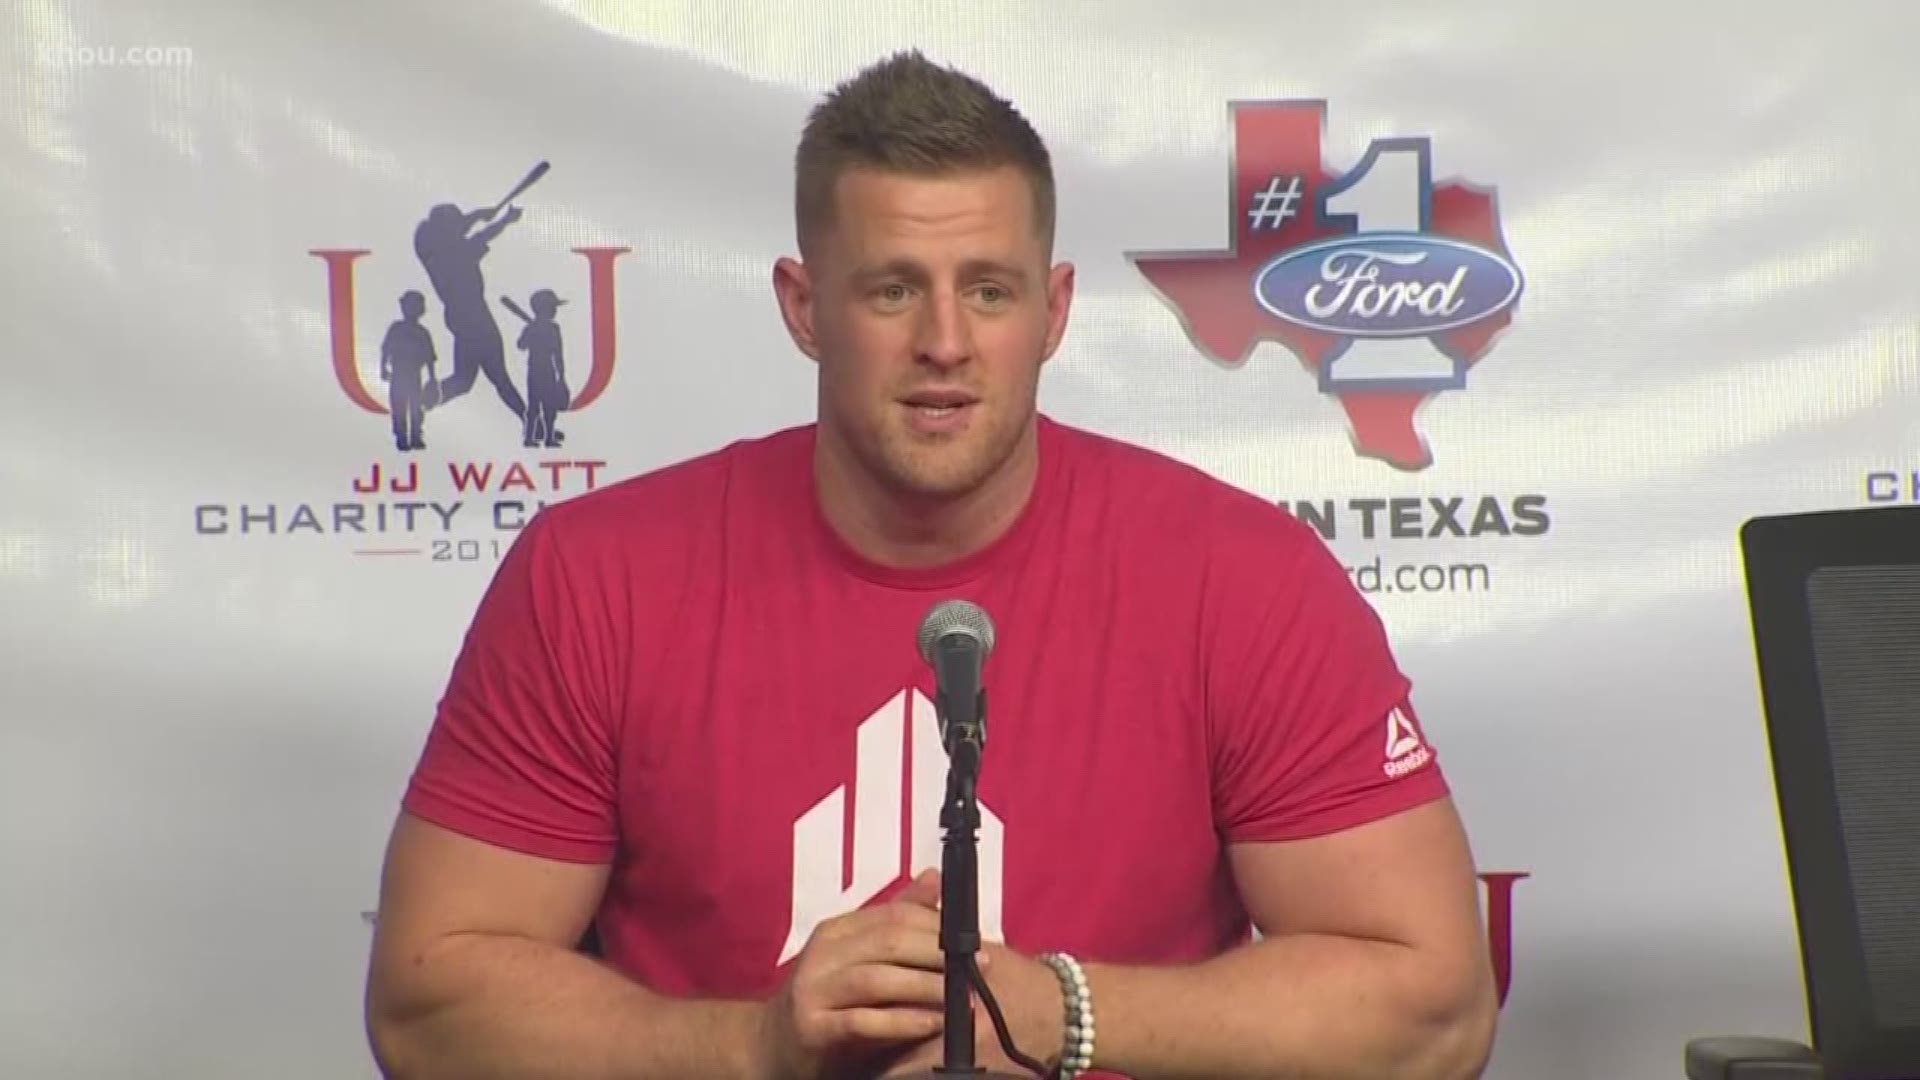 JJ Watt's foundation raised more than $1 million for middle school athletics at the charity softball game.